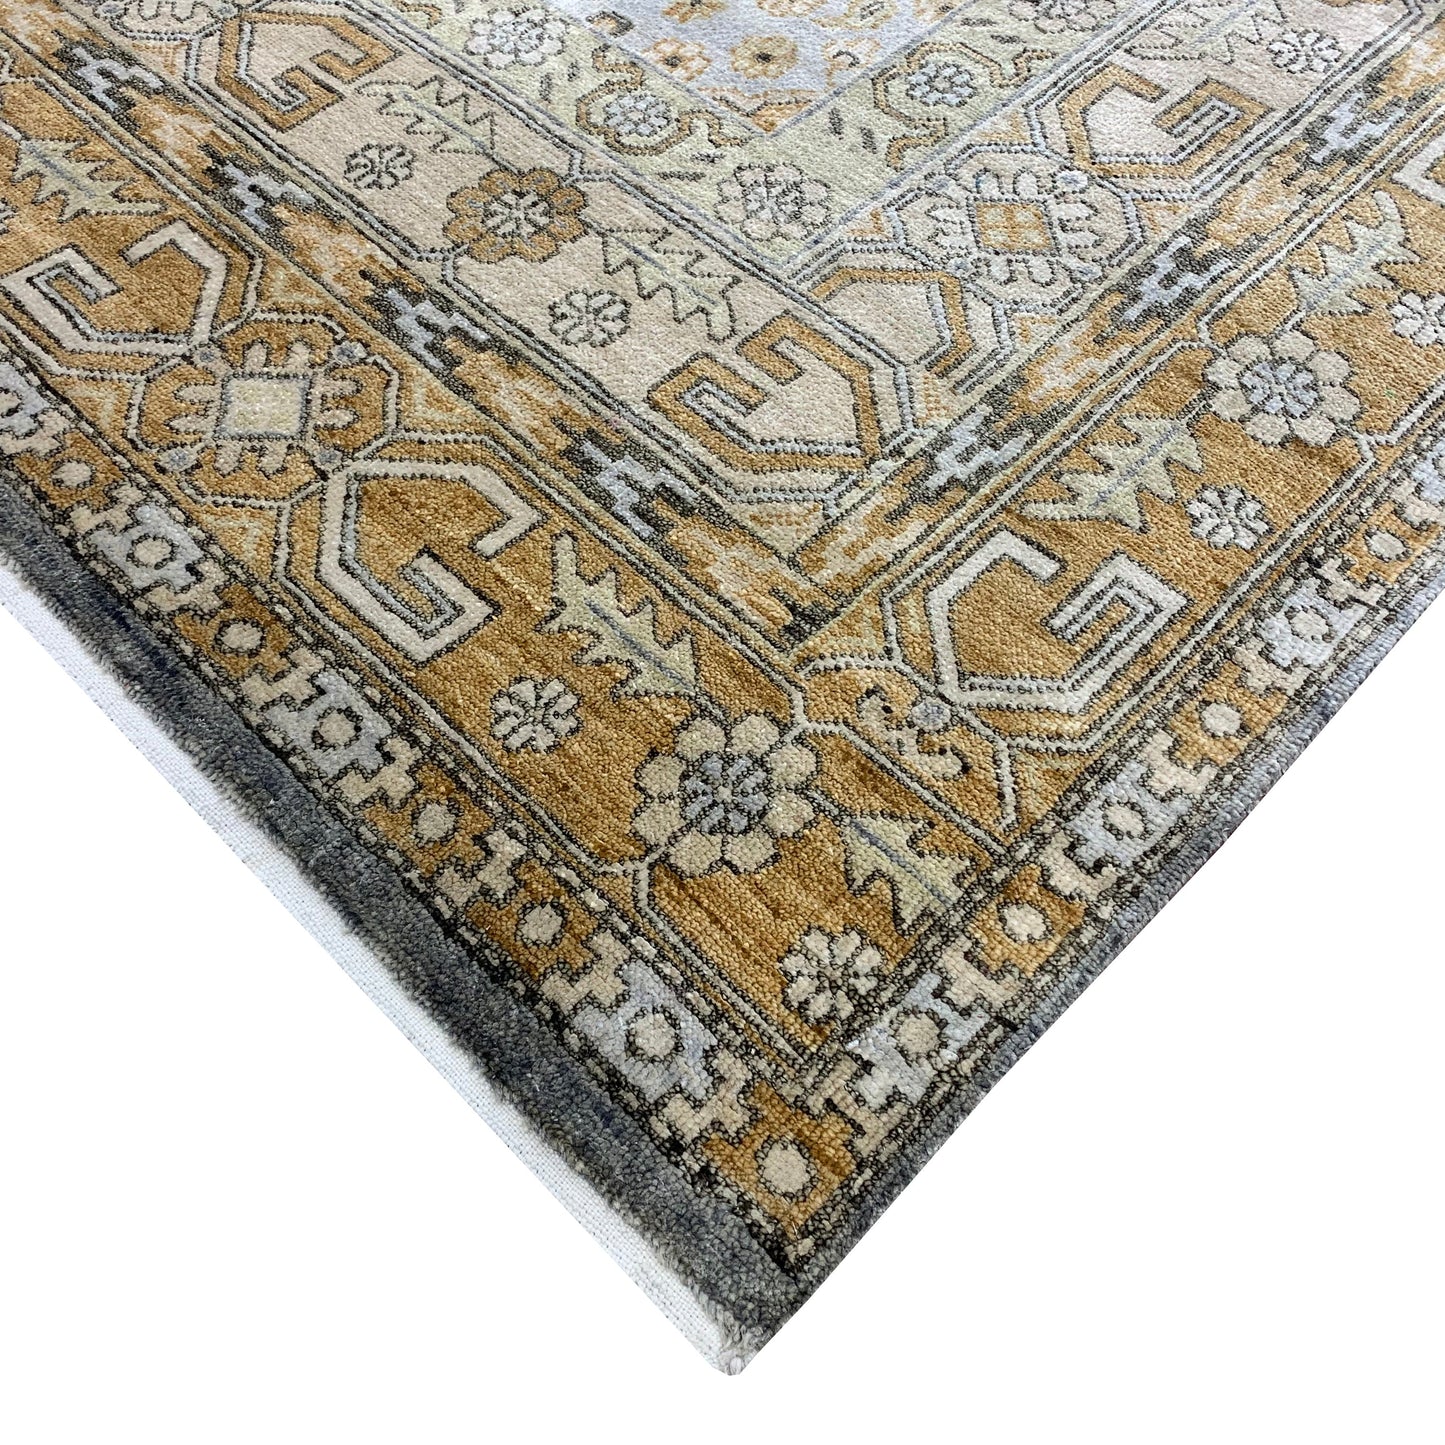 Get trendy with Gold and Grey Pure Silk Traditional Handknotted Area Rug 9.0x12.3ft 274x373Cms - Traditional Rugs available at Jaipur Oriental Rugs. Grab yours for $7940.00 today!